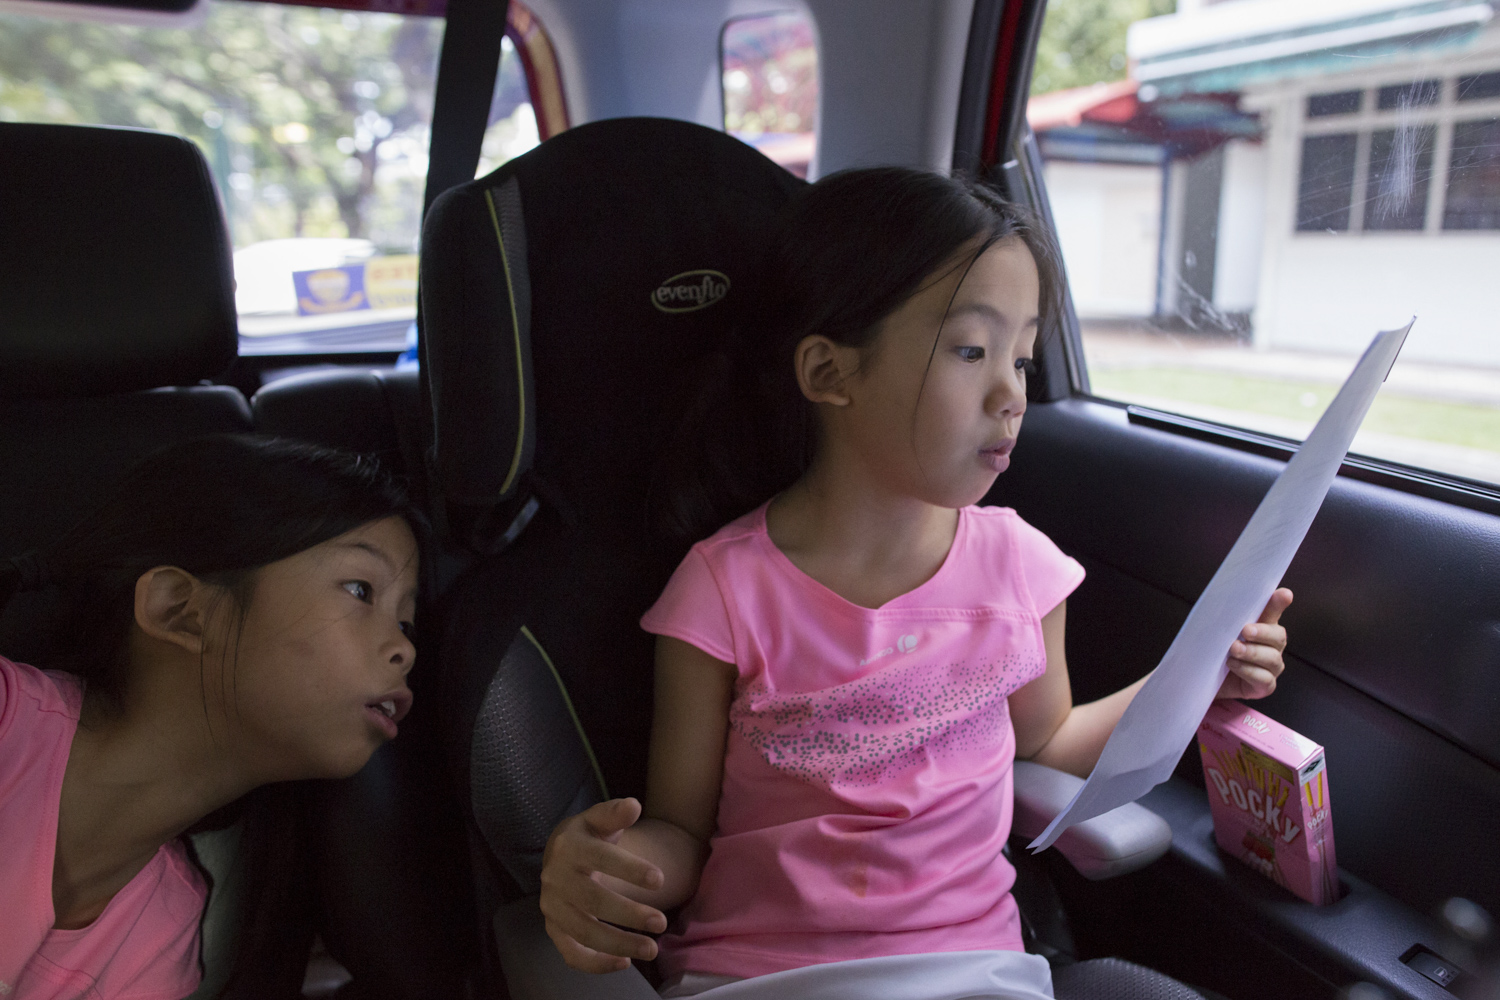 After packing meals, the girls head off in their mother’s car to deliver food personally to meal recipients. Angie helps direct her mother as she reads out a list of addresses.